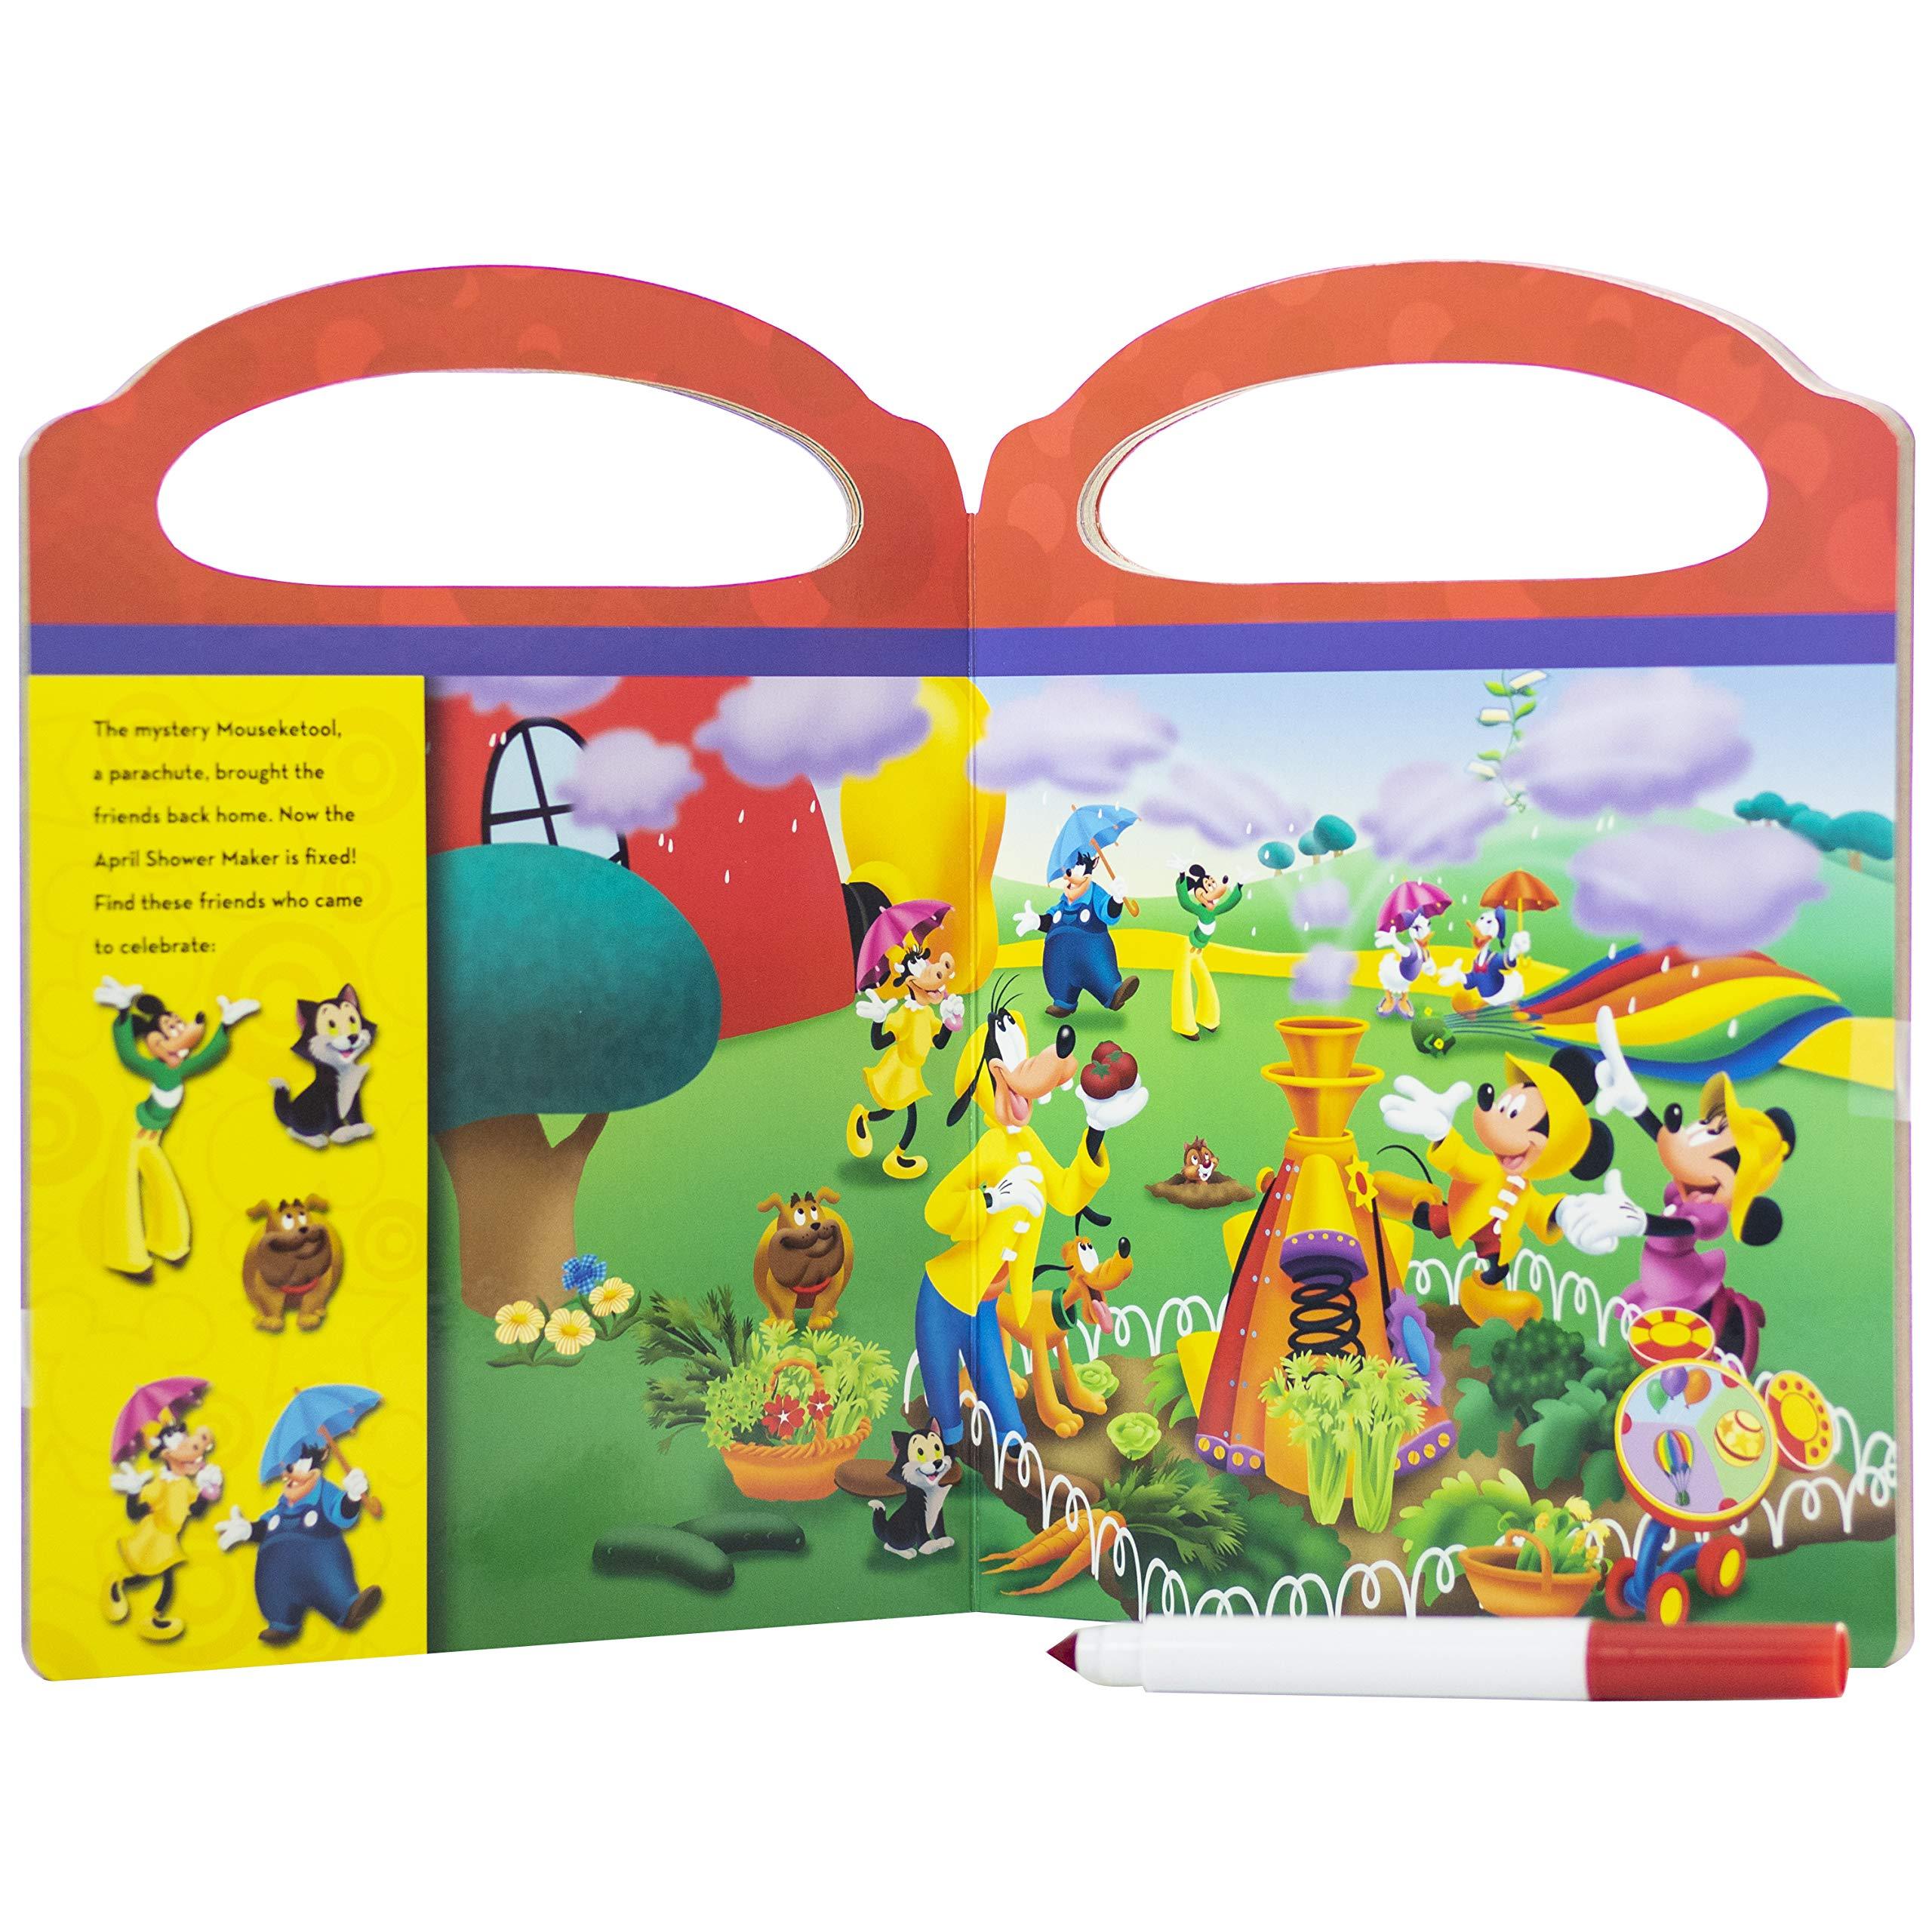 Mickey Mouse Clubhouse - Write-and-Erase Look and Find Wipe Clean Board - Ourkids - OKO